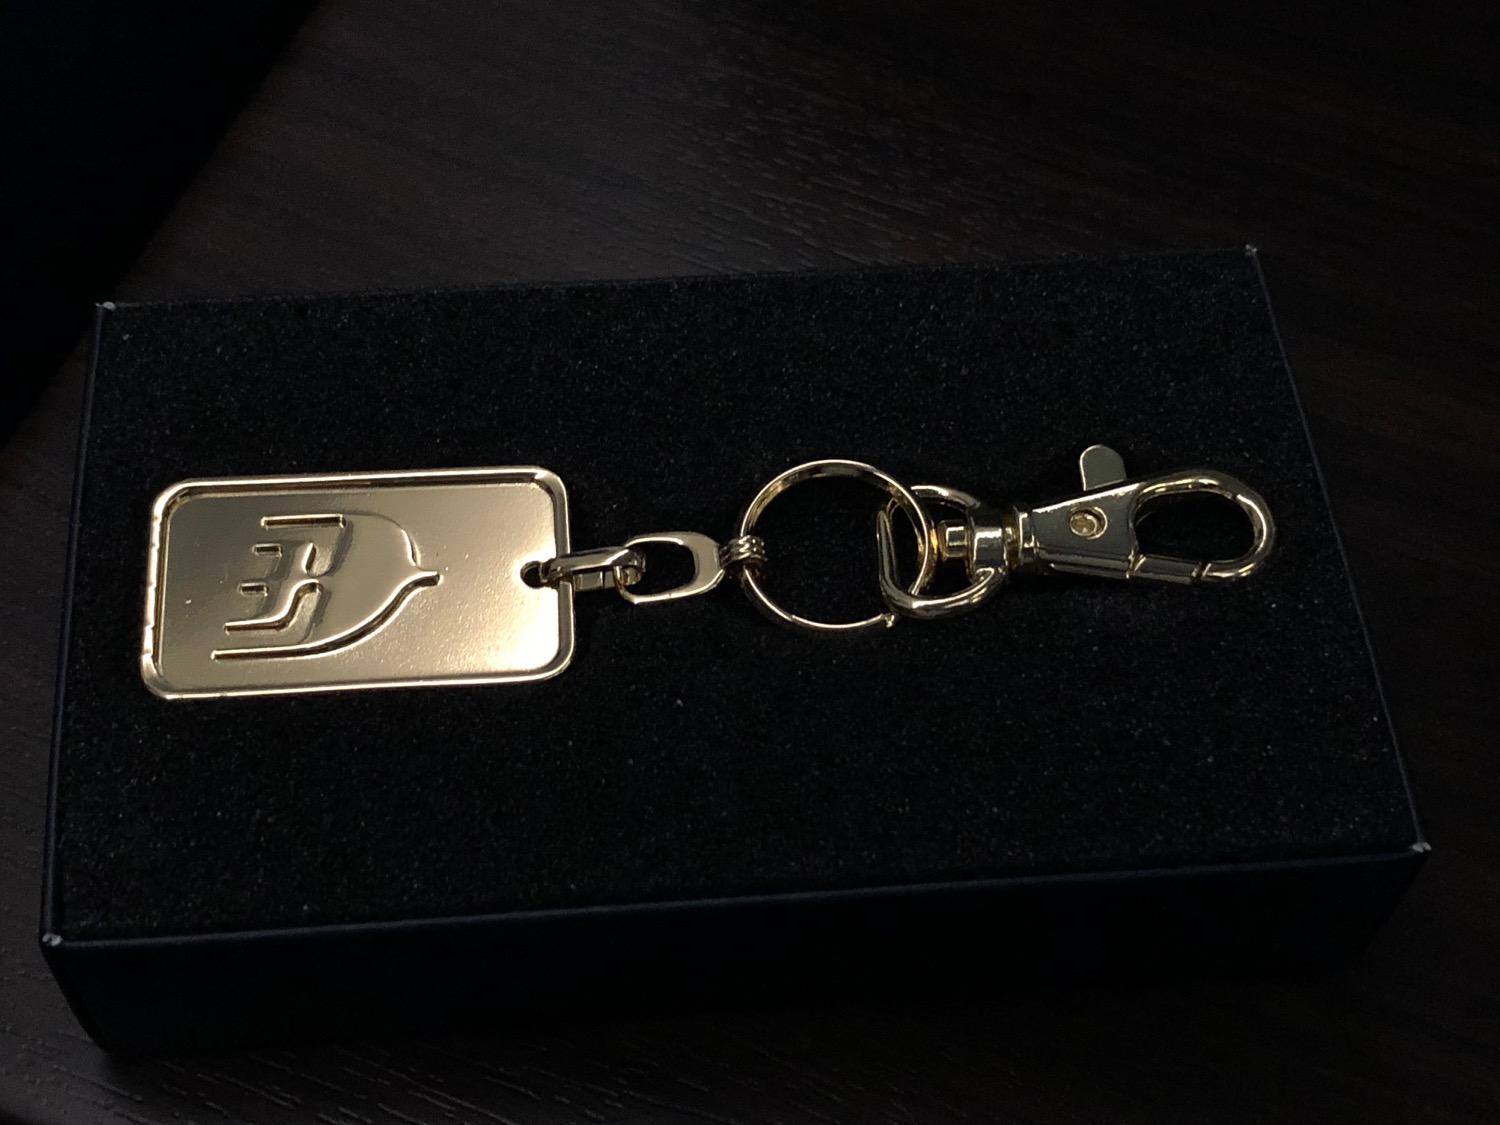 a gold key chain on a black surface